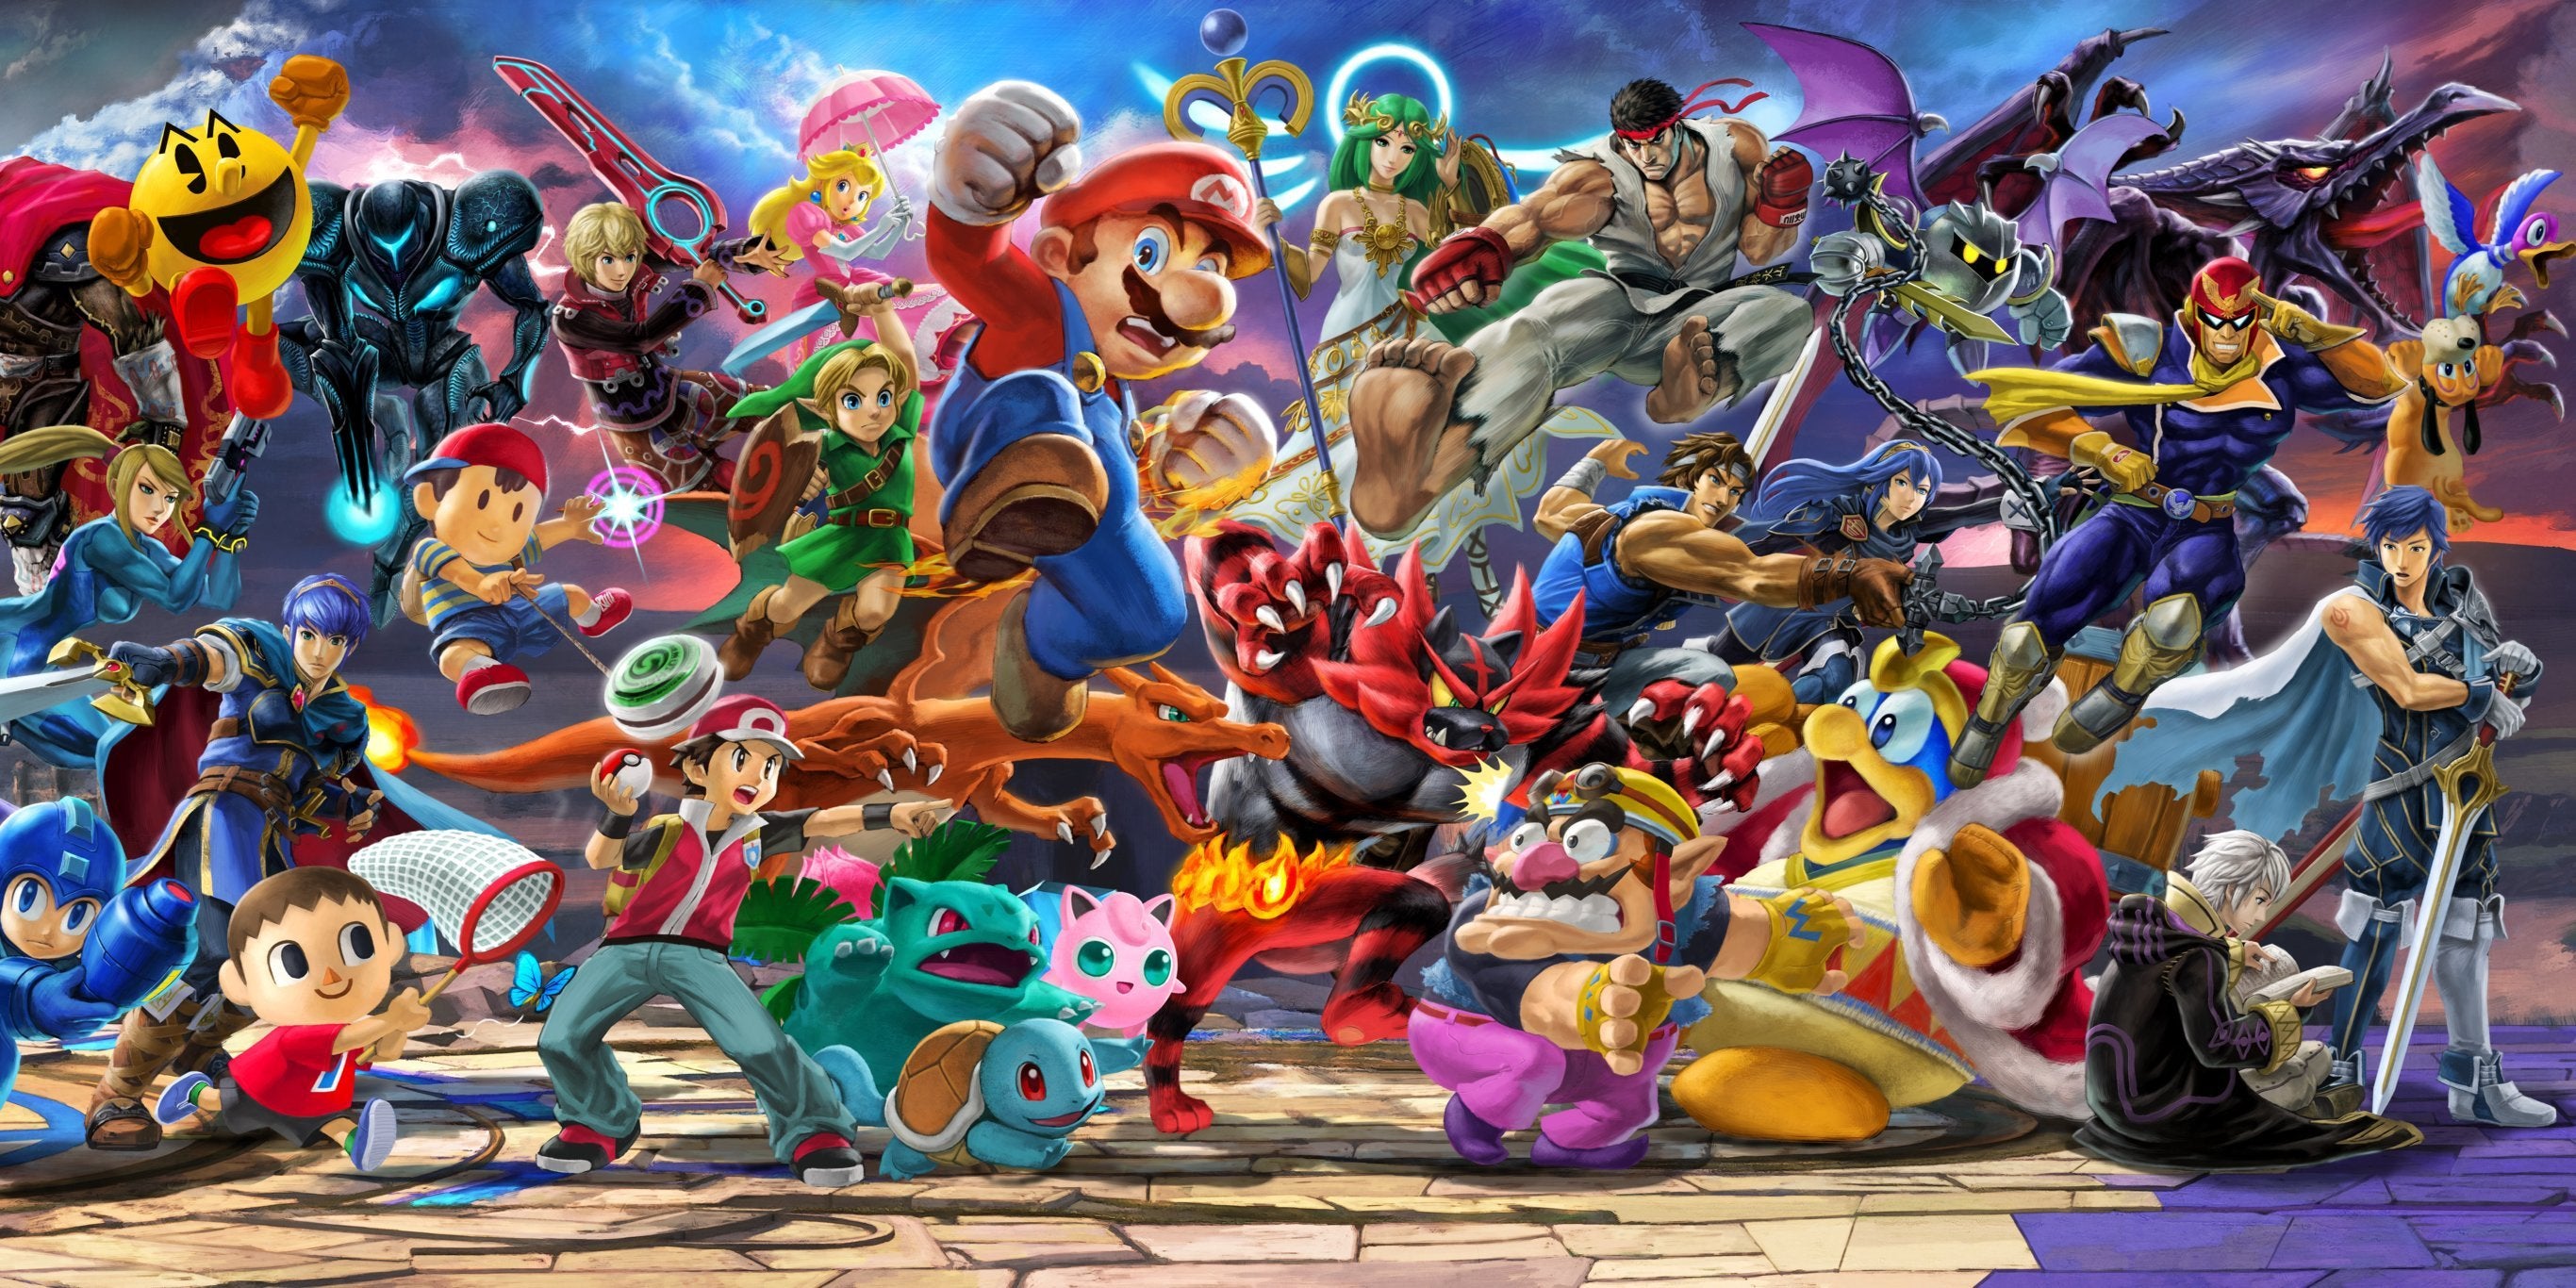 Image for Sakurai encourages everyone to watch Smash Bros.' final character reveal 'even if you don't play'